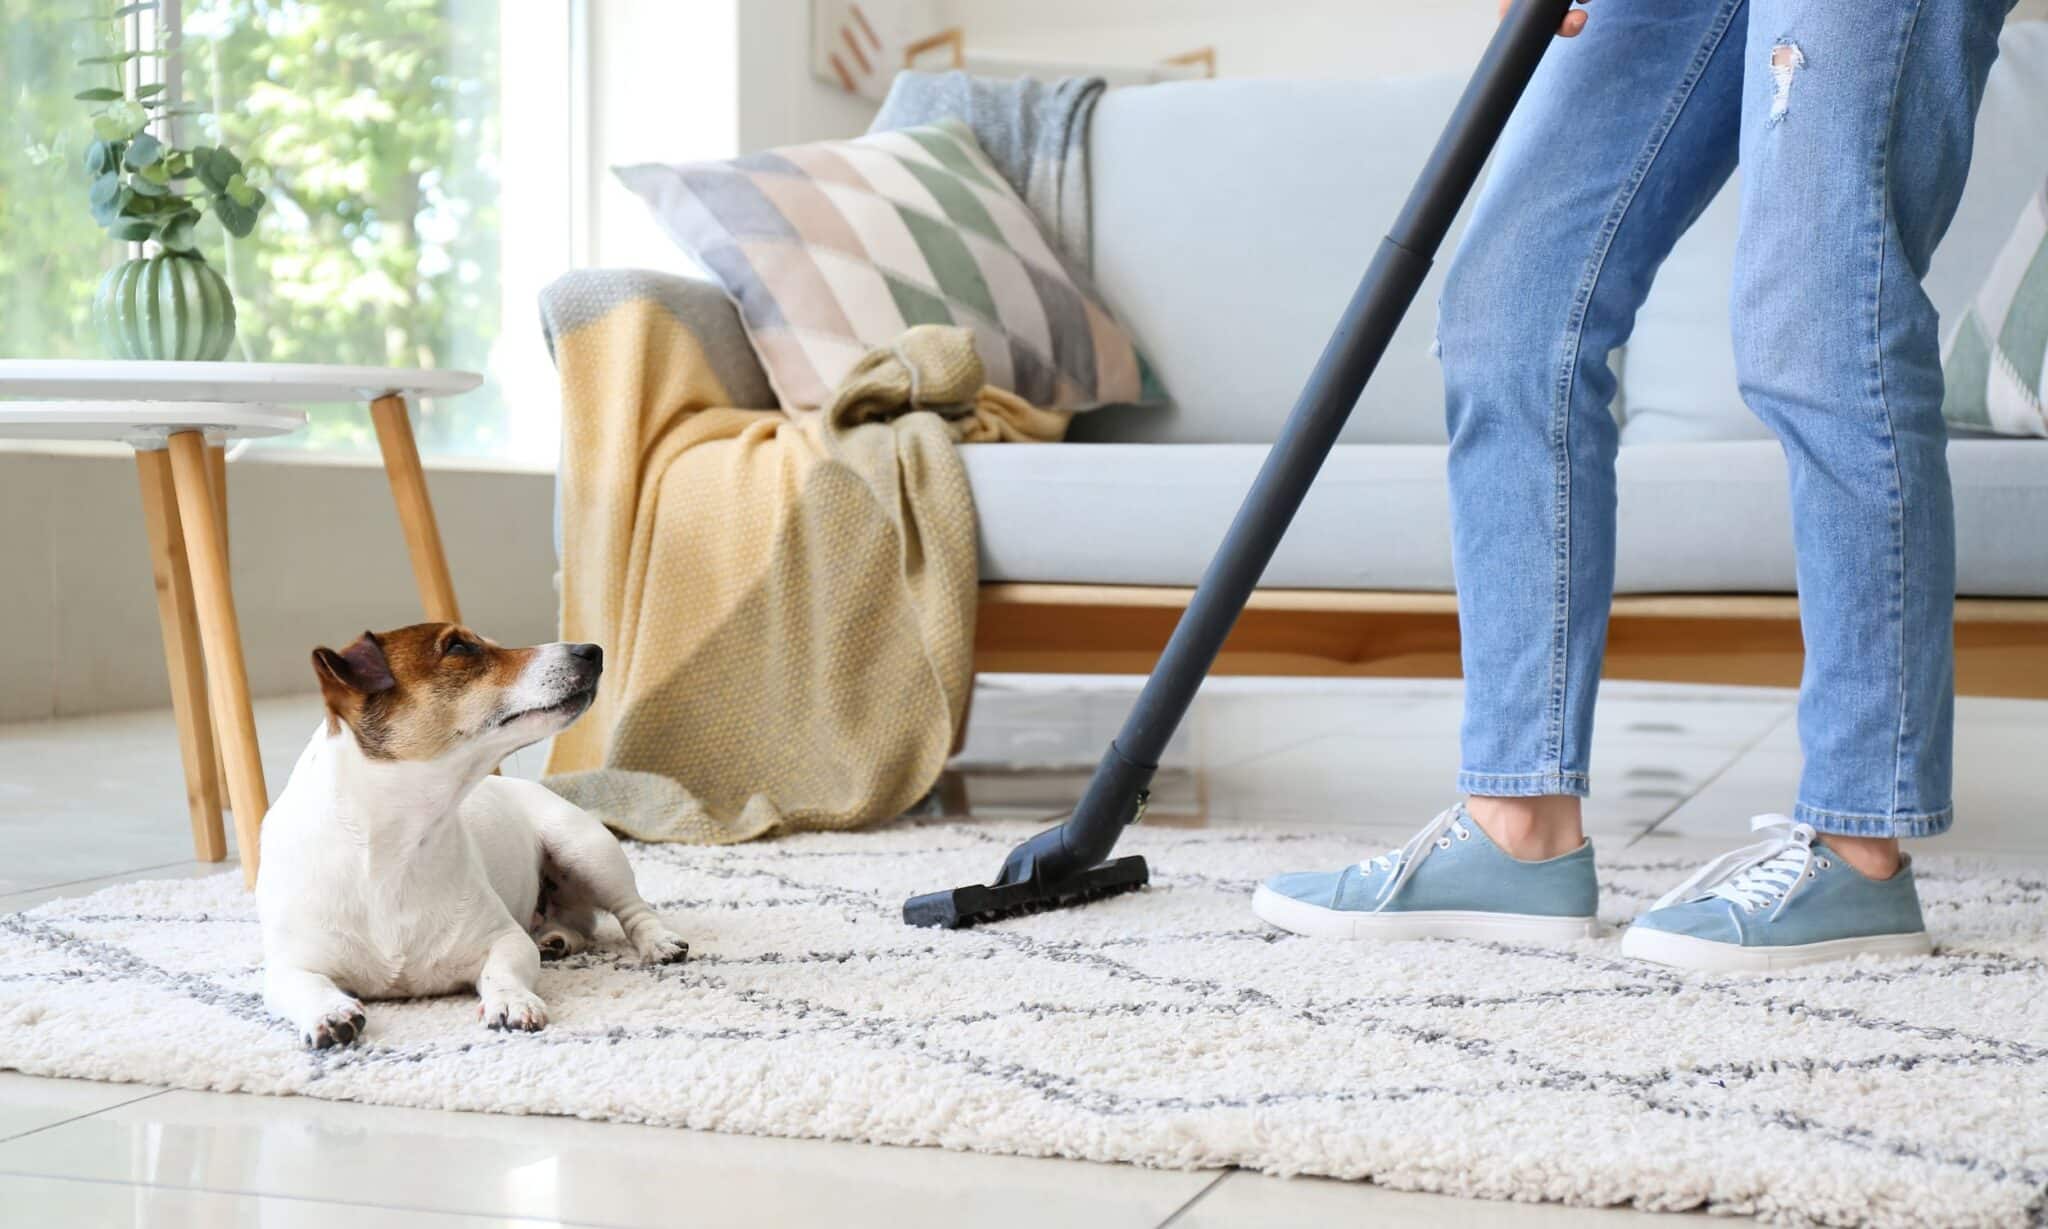 Why Are Dogs Scared Of Vacuums?